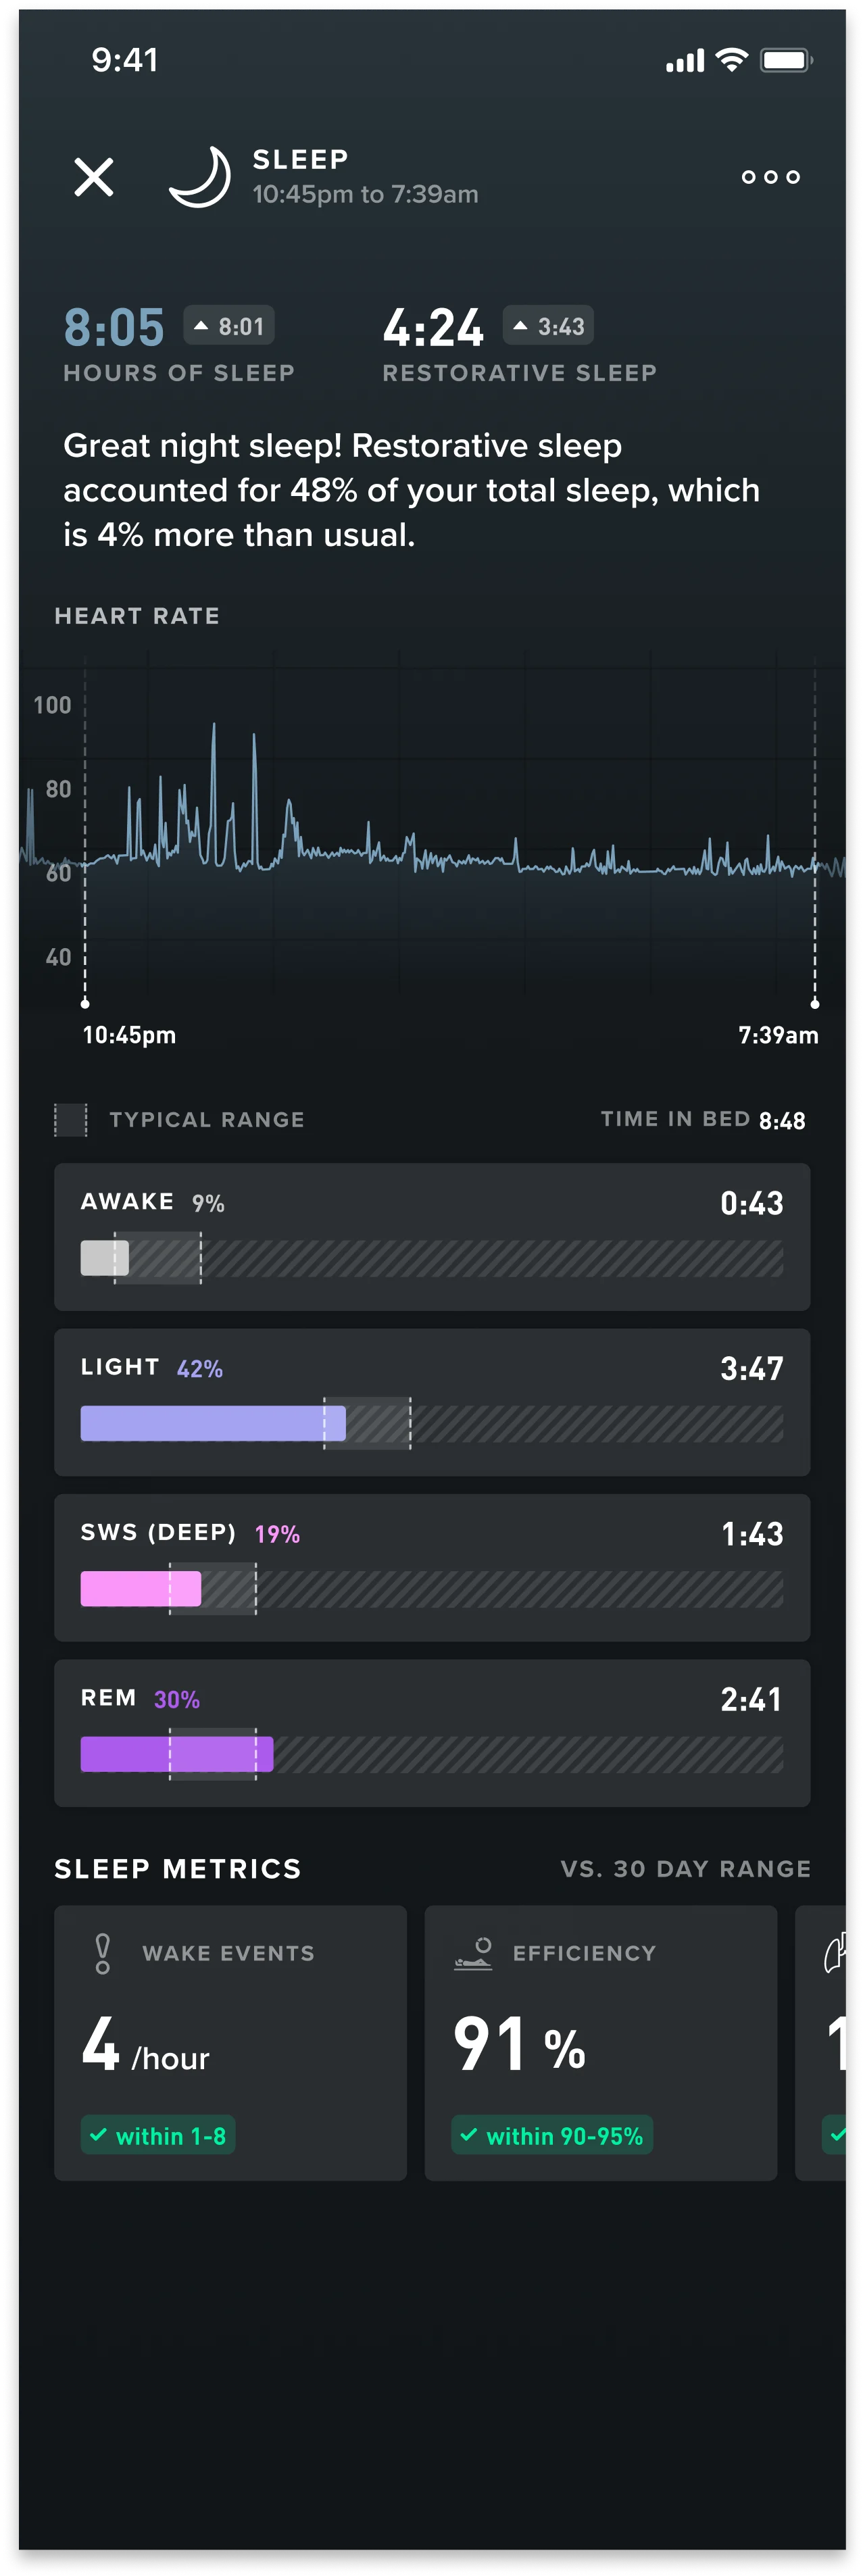 Kernel's Bryan Johnson shows off his perfect sleep tracked by WHOOP.